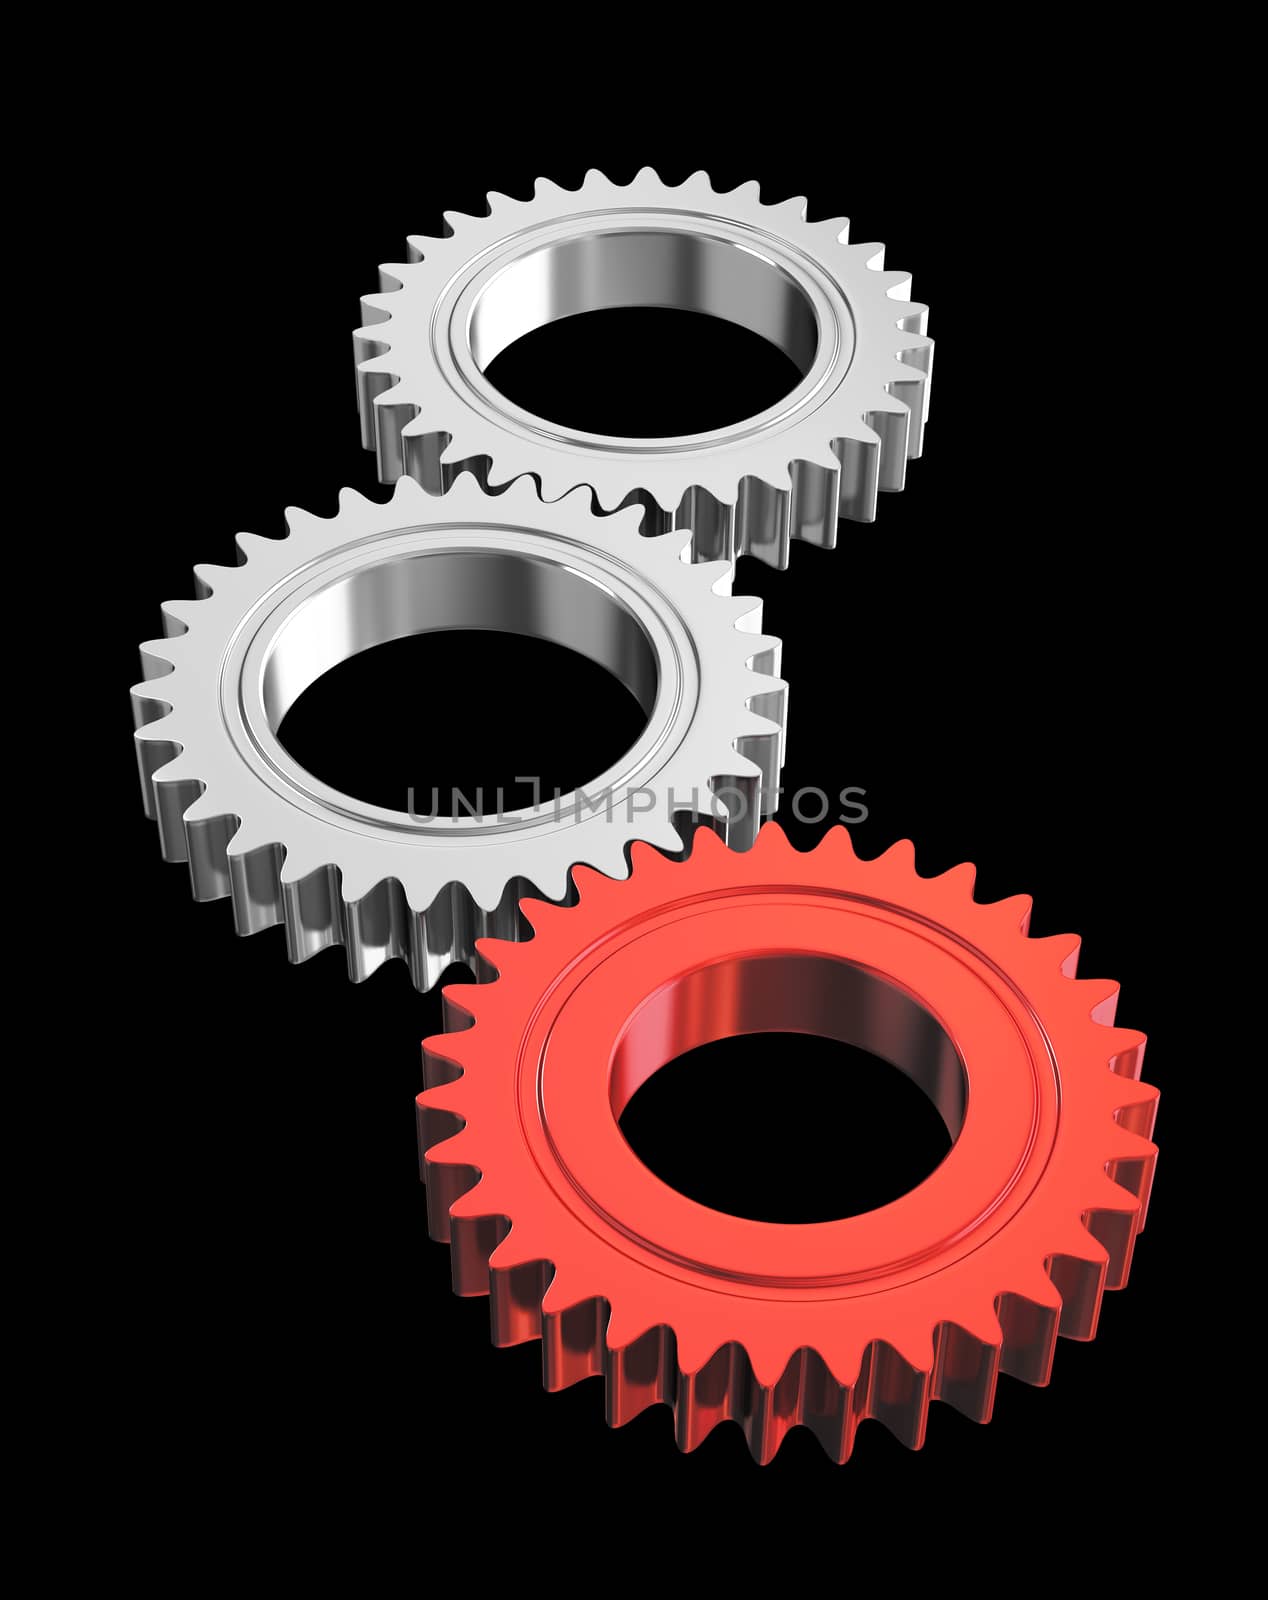 Gears on black background - clipping mask